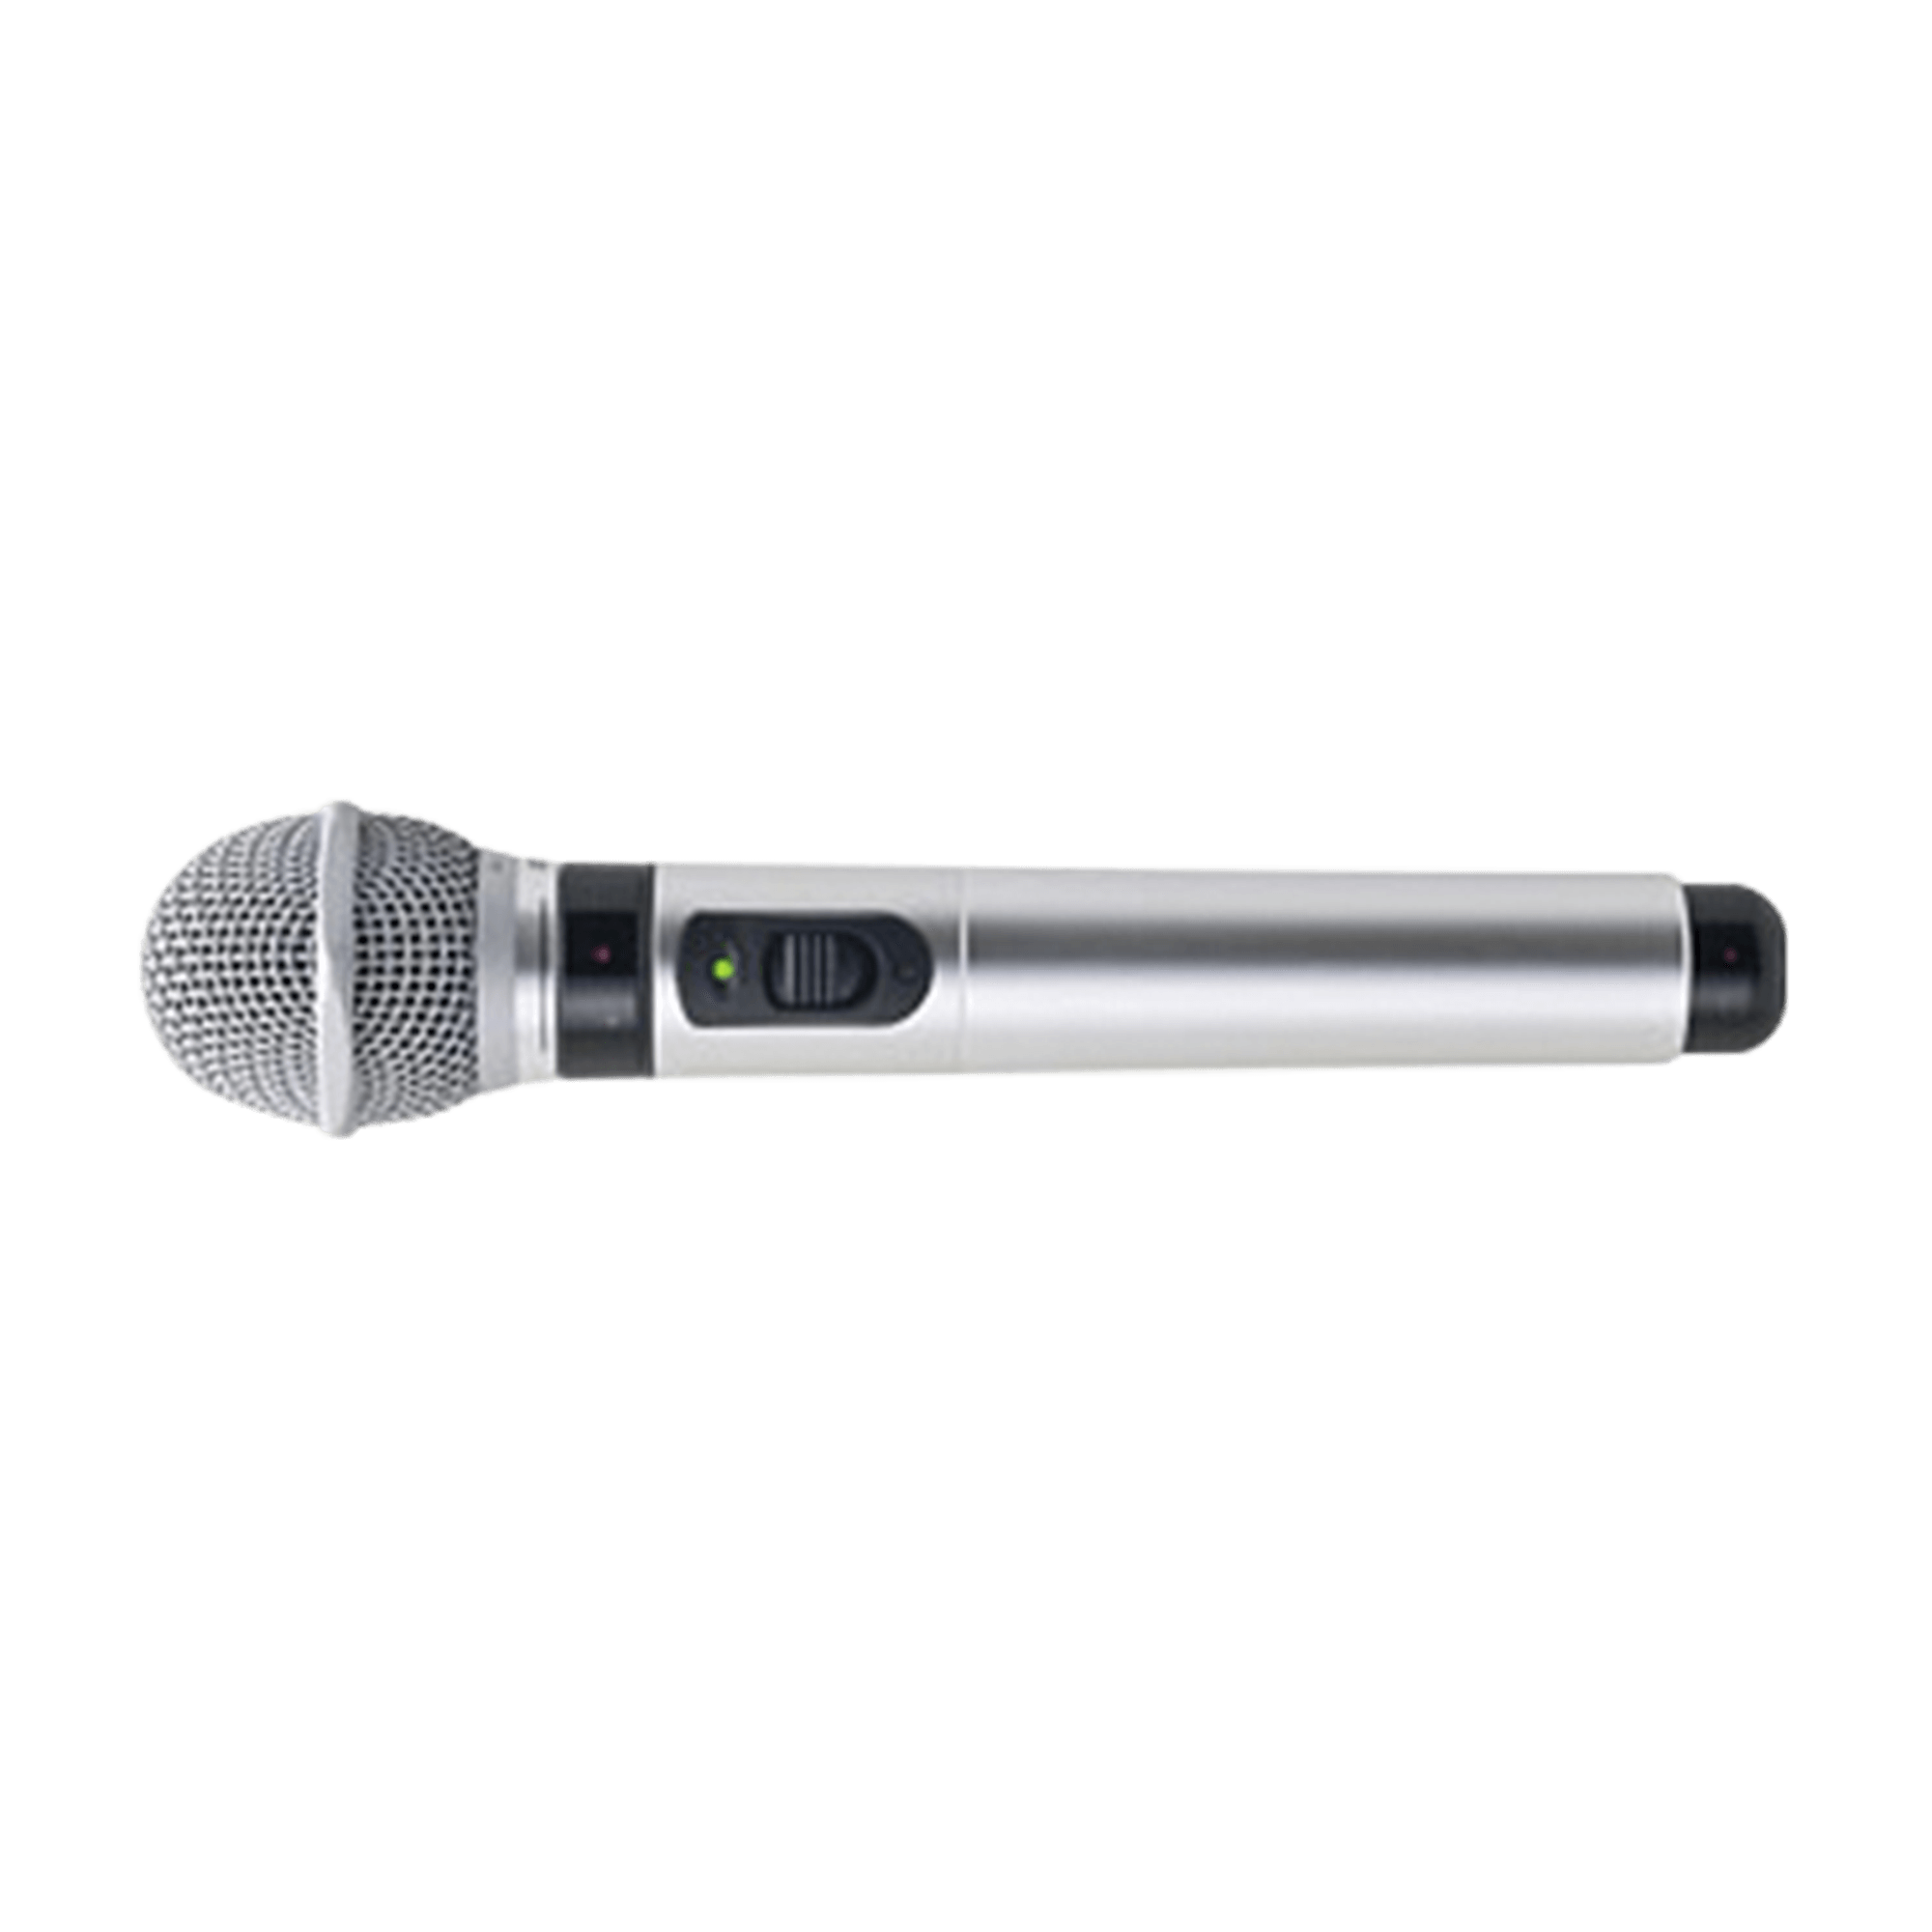 ATIR-T88Infrared Handheld Microphone for ATCS-60 Conference System